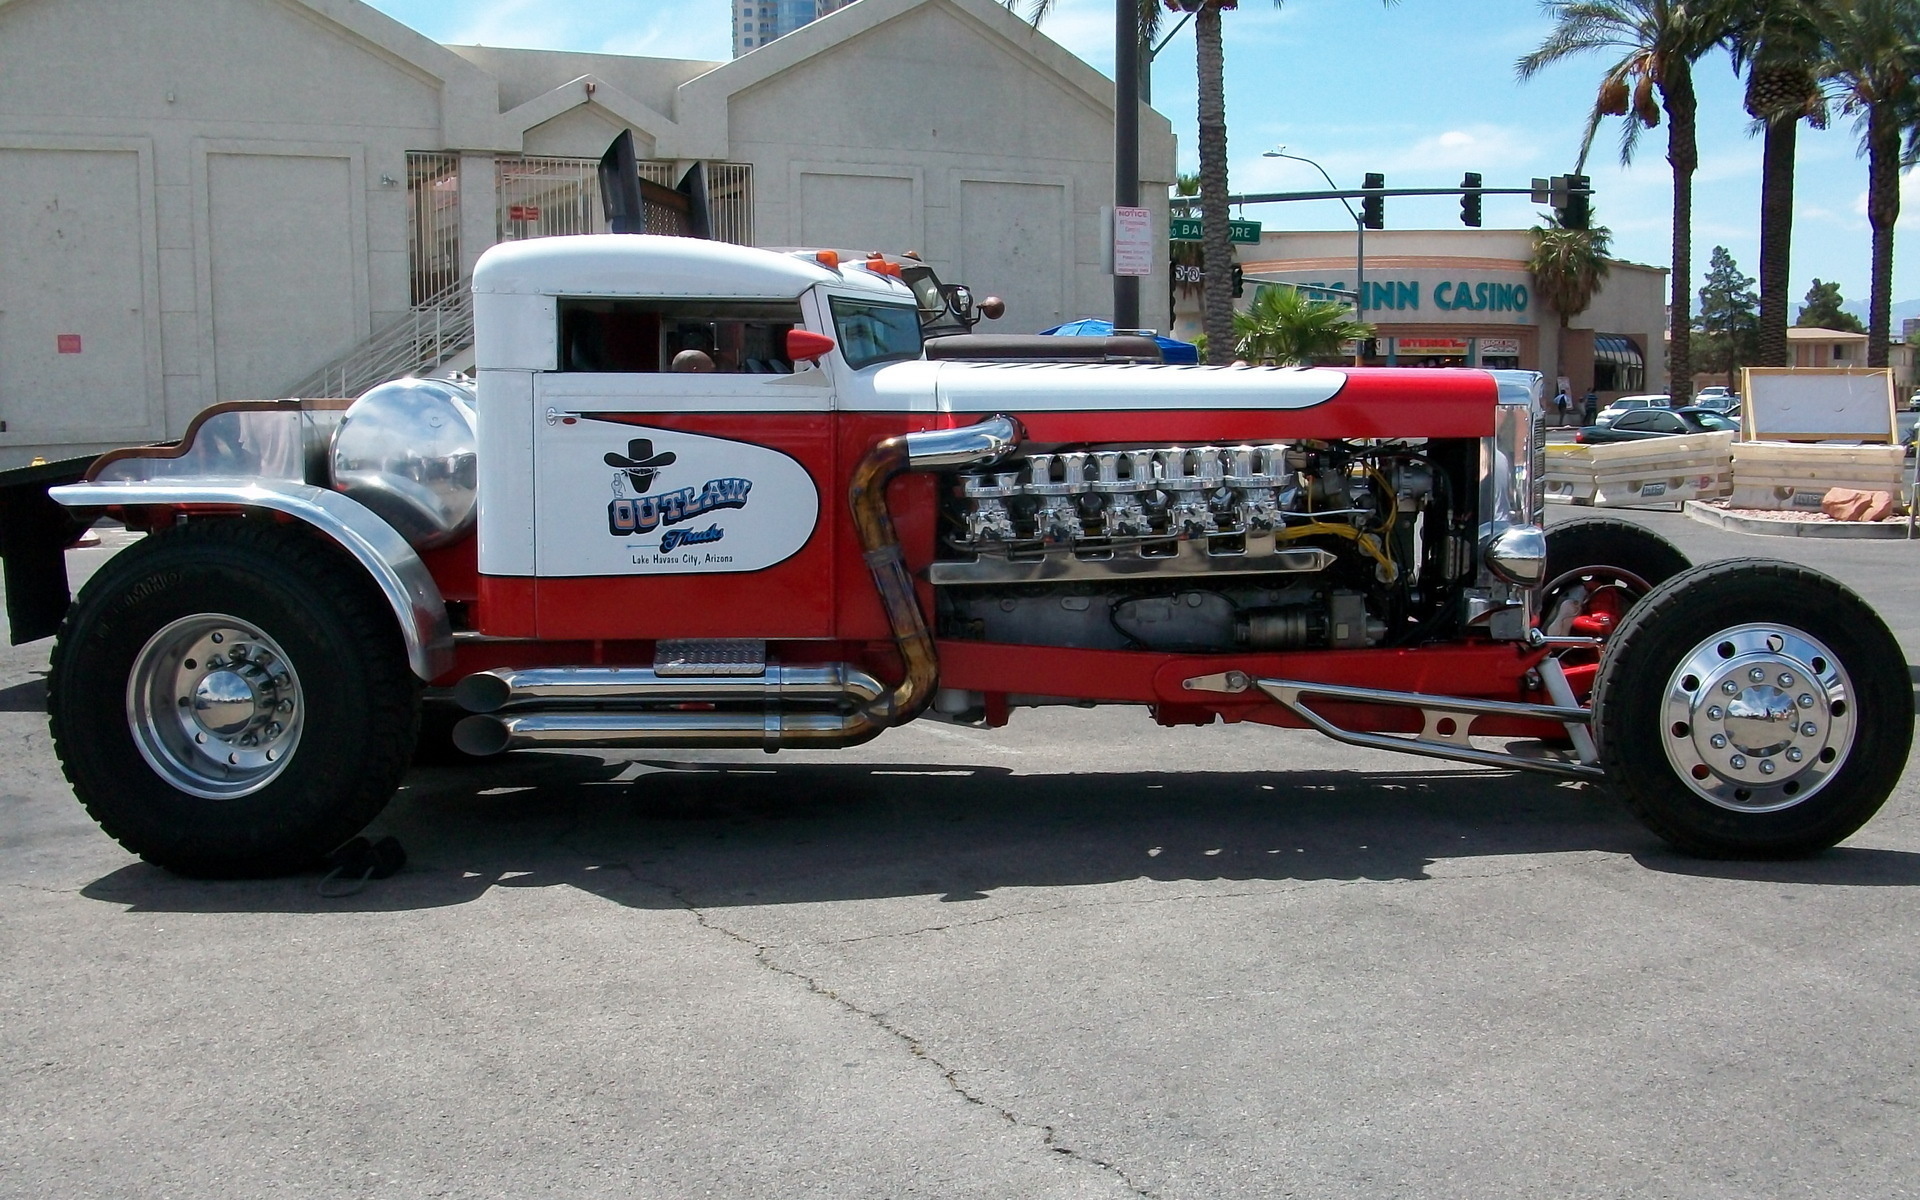 peterbilt, red, white, car, truck, truck wheels and tyres, truck v10 engine